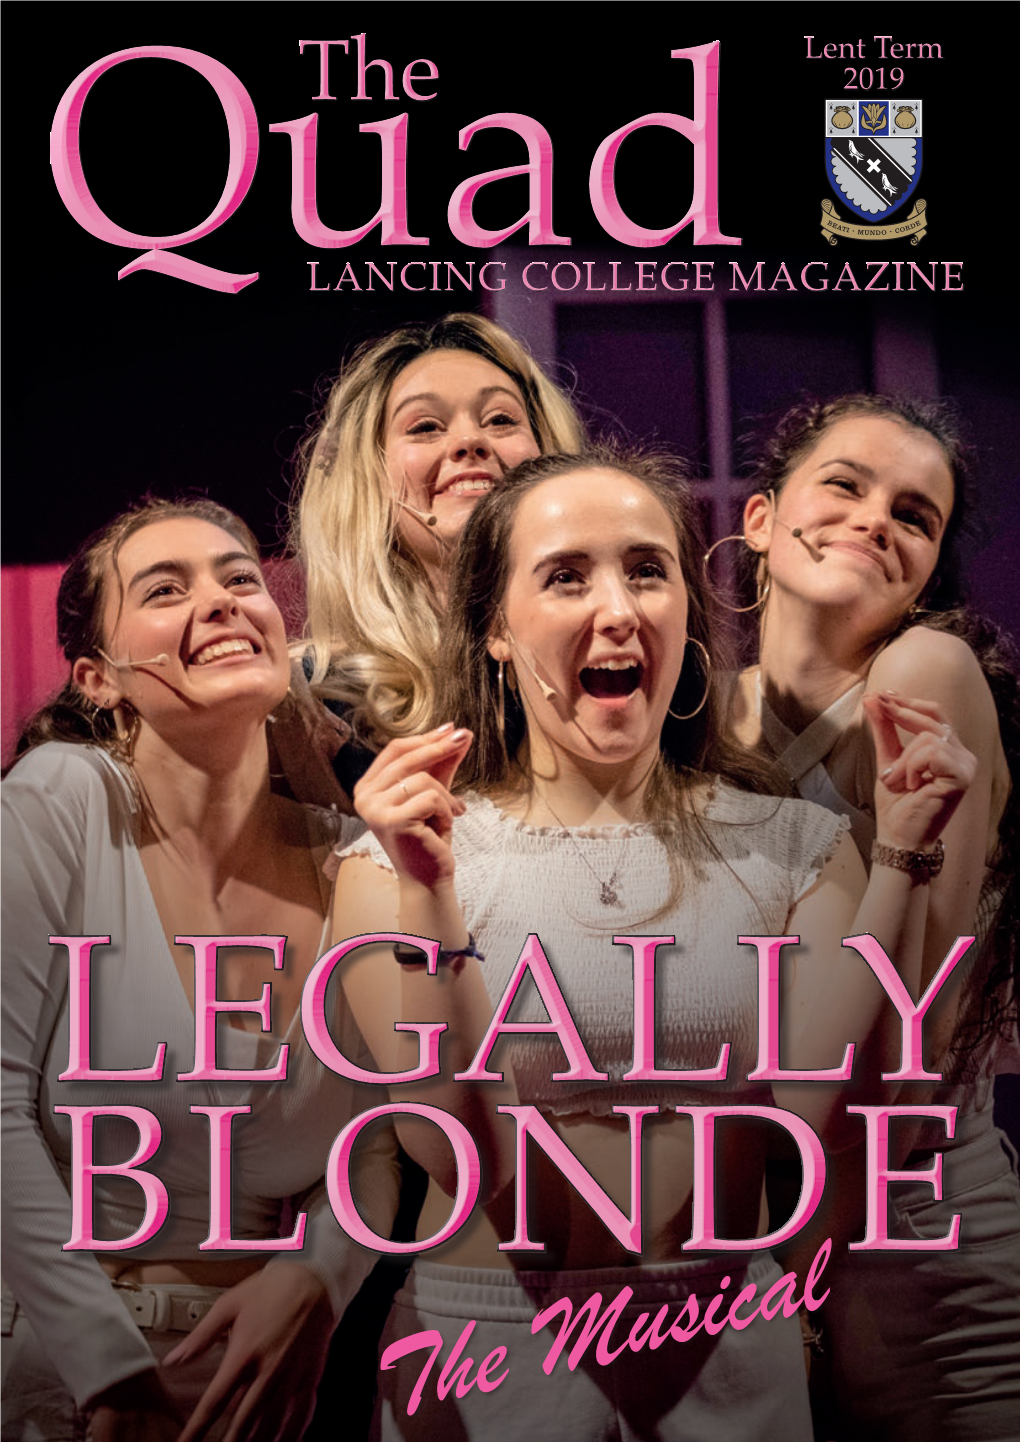 The Musical Welcome Legally Blonde, This Term’S Musical, Provides the Pinkest Quad Cover on Record As Well As the Rosiest of Glows in the Recollection